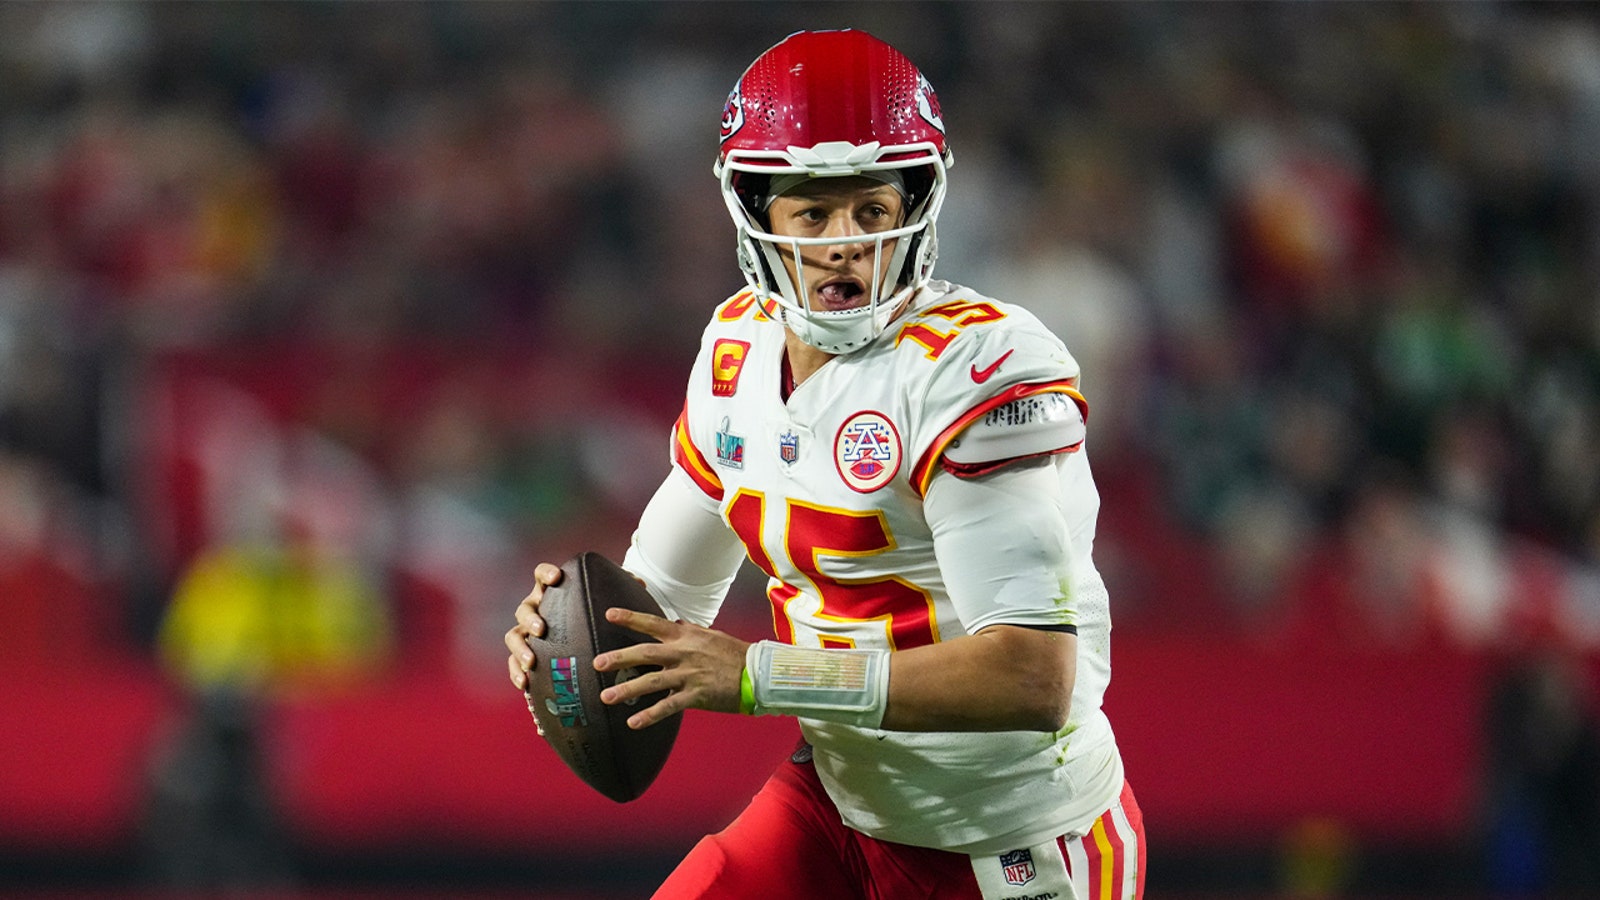 Chiefs' Patrick Mahomes shines with three TDs in Super Bowl LVII win over Eagles